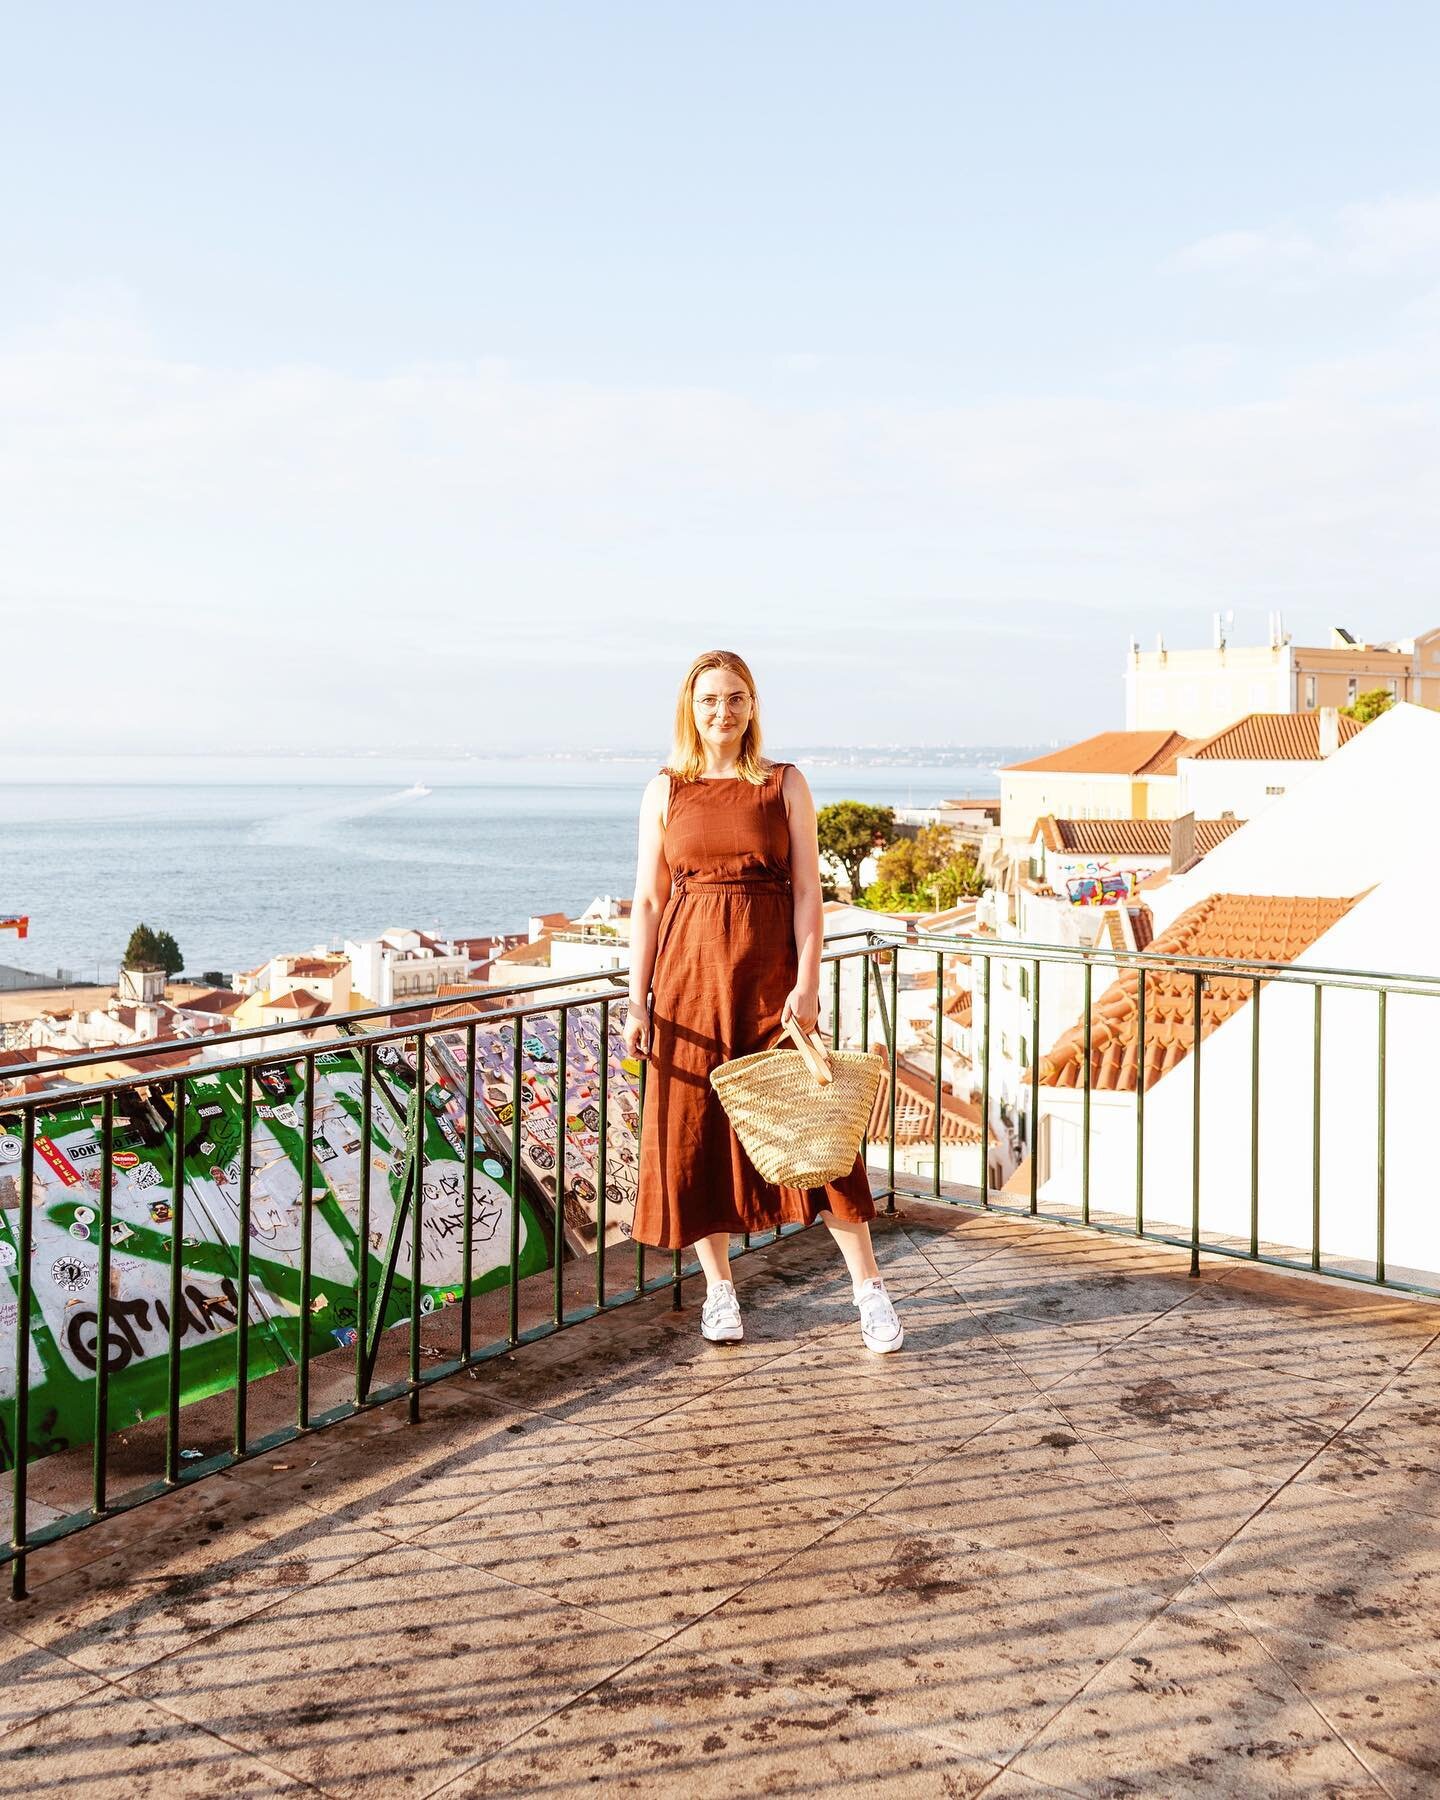 You can't beat the early morning sun illuminating the terracotta rooftops of Alfama neighbourhood. 
⠀⠀⠀⠀⠀⠀⠀⠀⠀
Miradouro das Portas do Sol might not the widest vista or overlook any of the city's major landmarks but you can't beat it for charm and vib